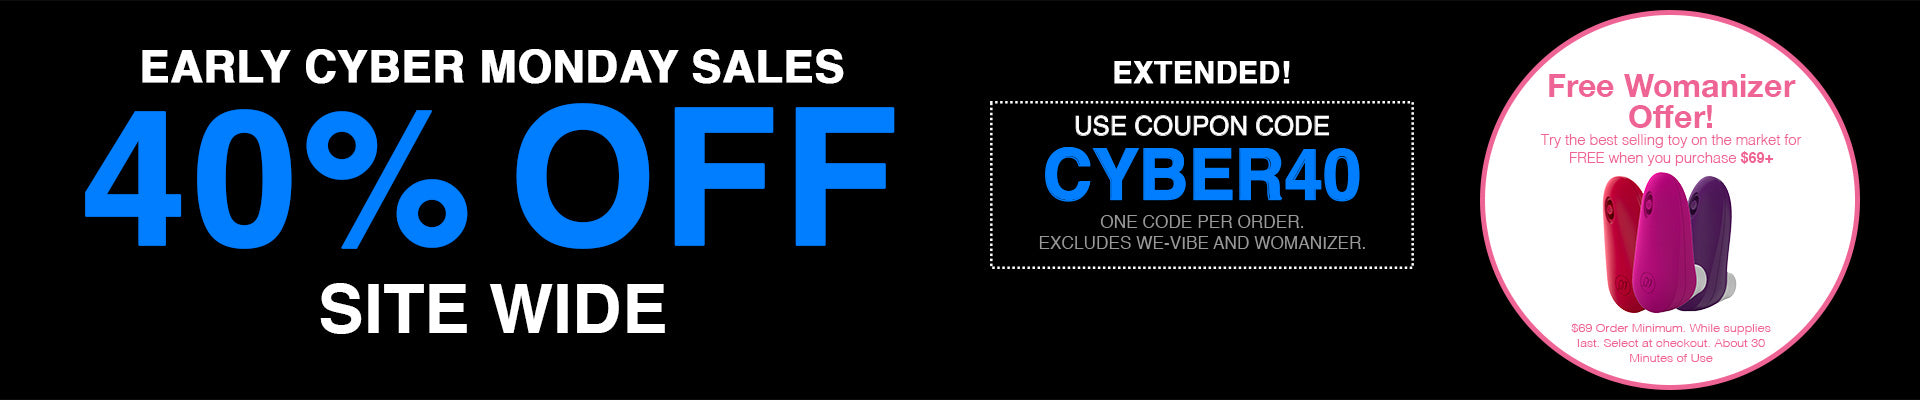 40% Off Site Wide - Use Code CYBER40